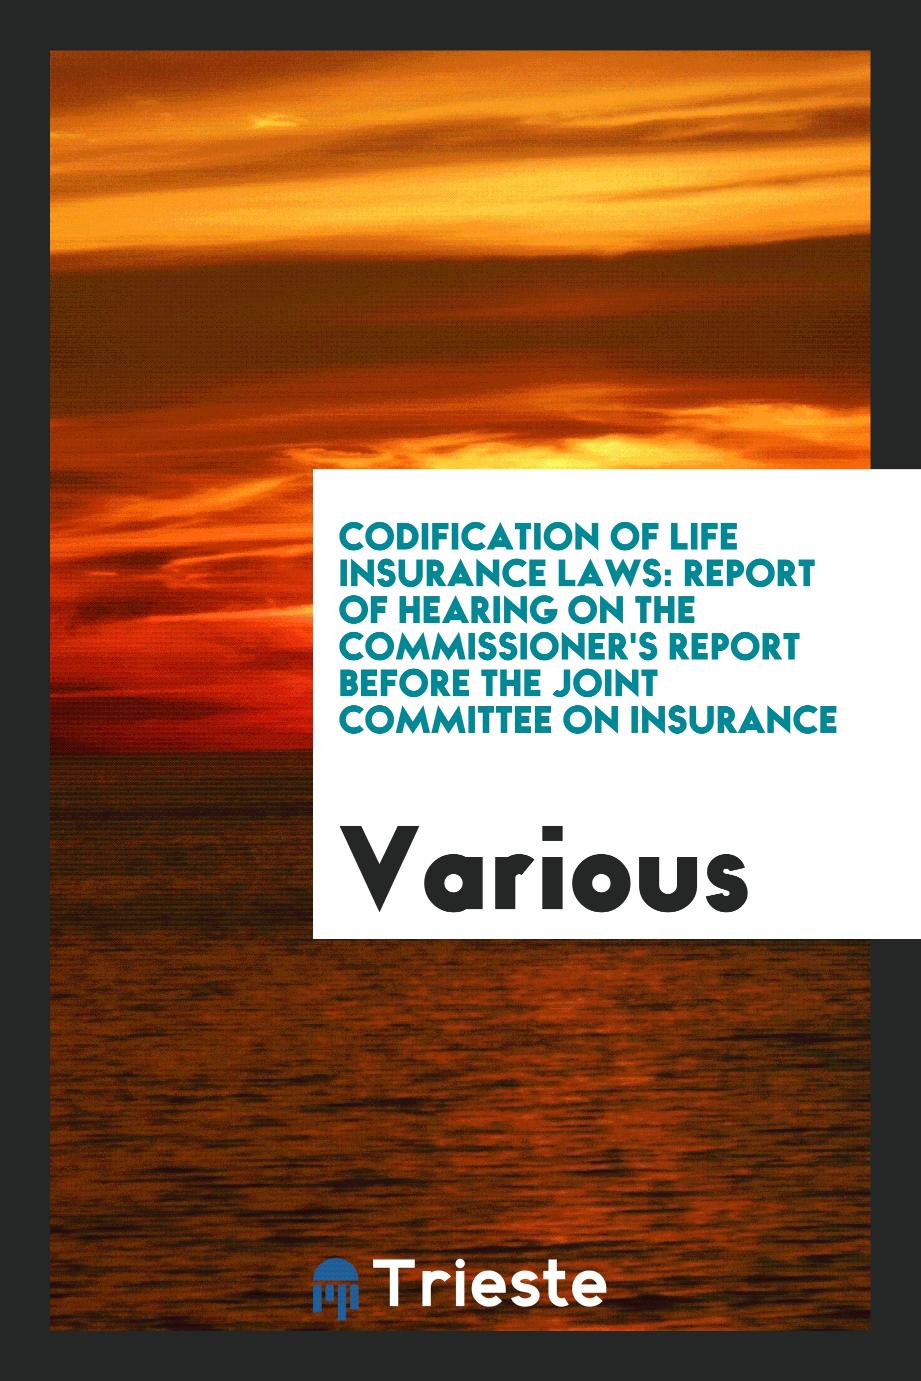 Codification of Life Insurance Laws: Report of Hearing on the Commissioner's Report before the Joint Committee on Insurance